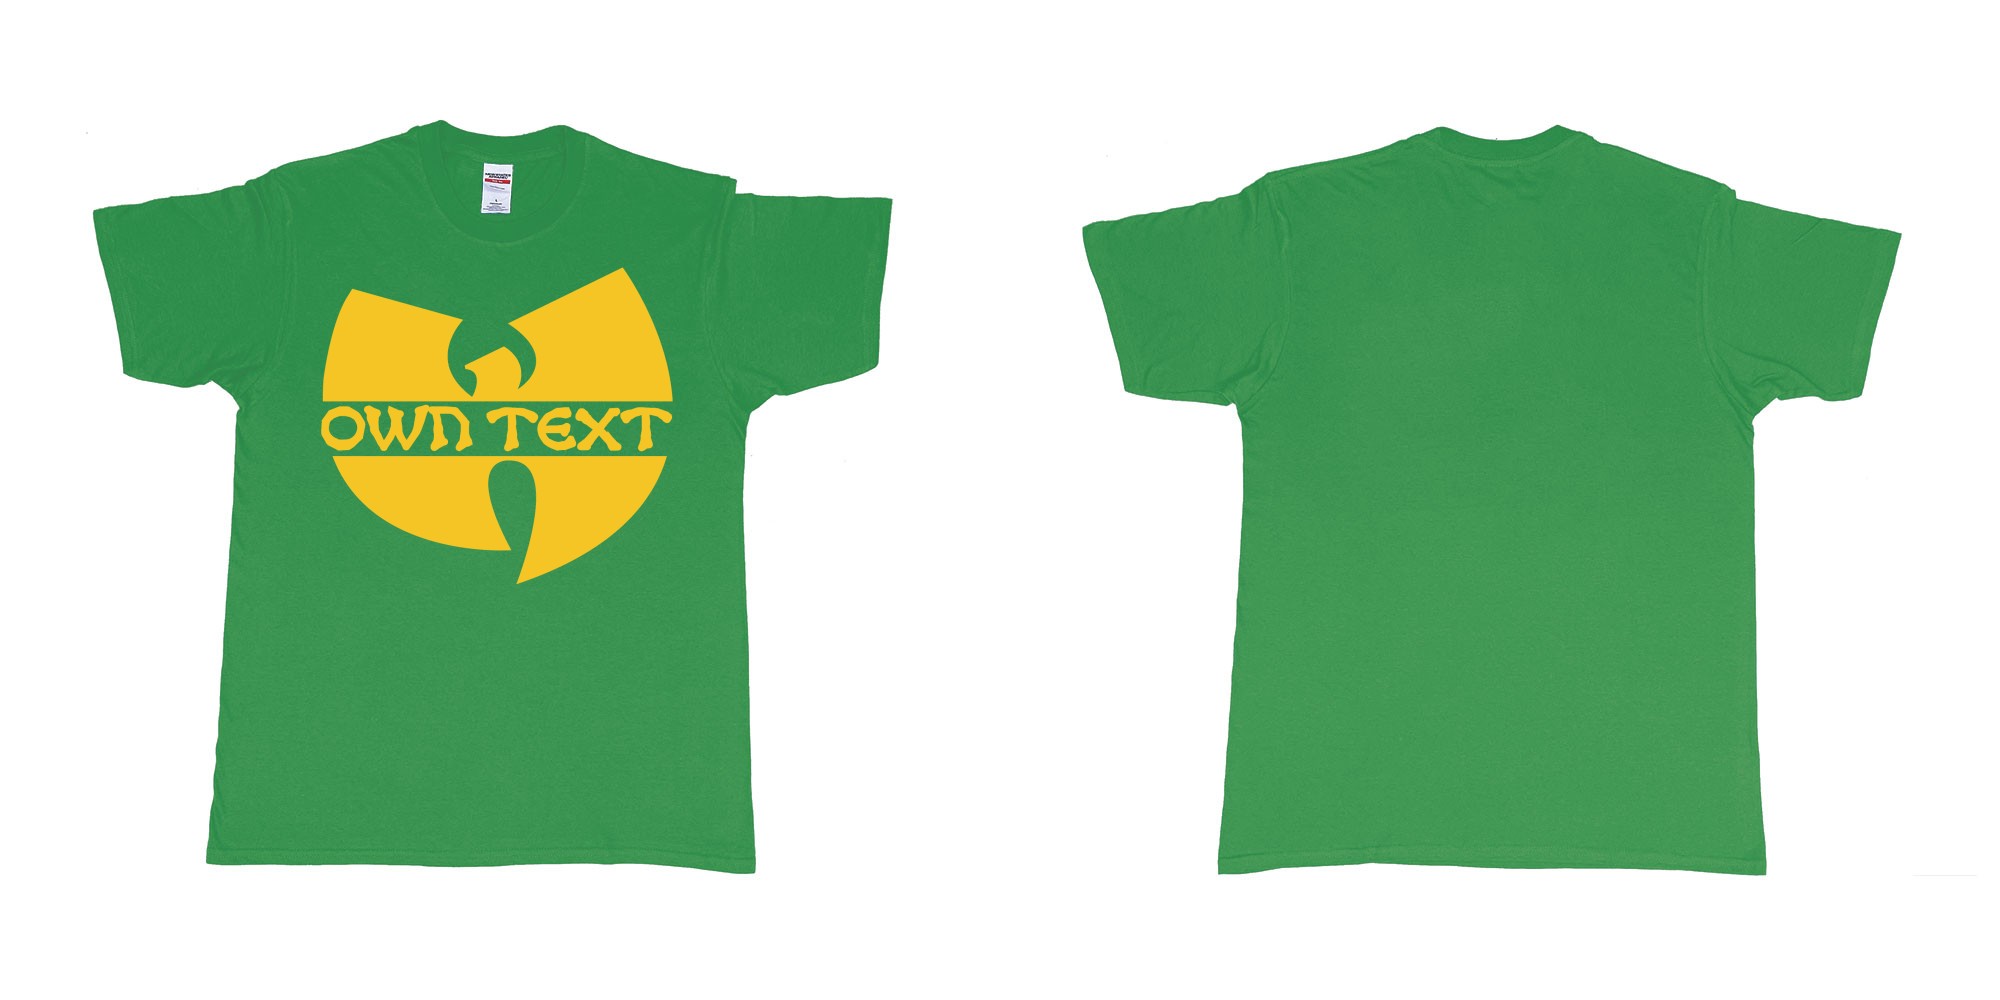 Custom tshirt design wu tang clan logo in fabric color irish-green choice your own text made in Bali by The Pirate Way